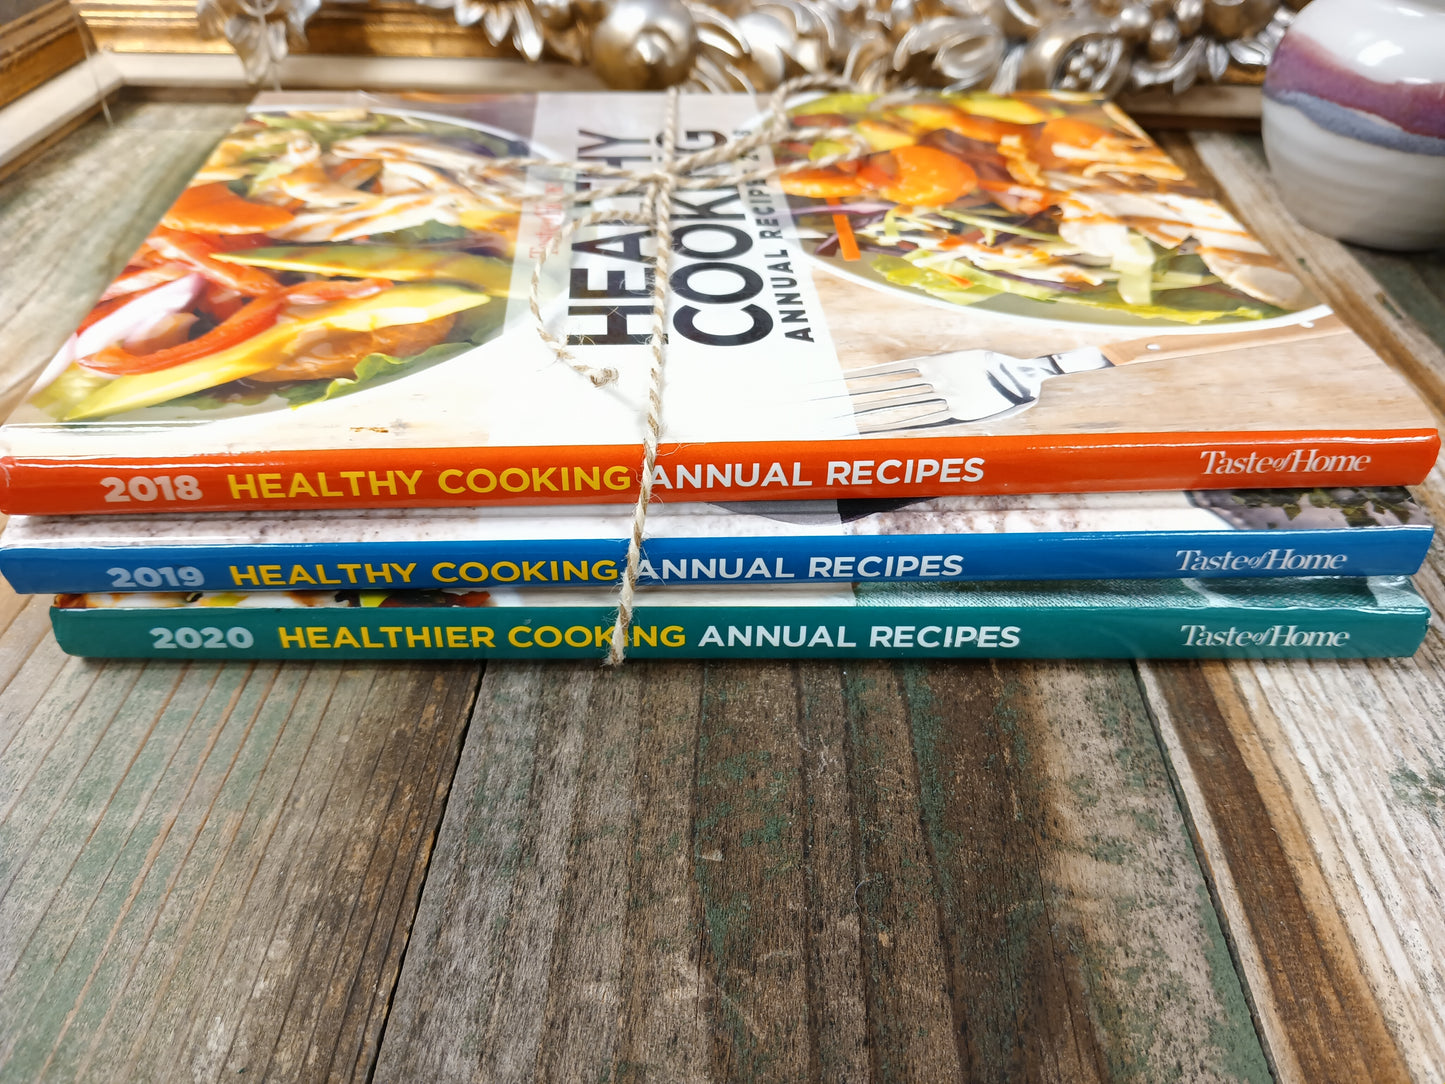 Healthy Cooking Annual Recipes 2018-2020 (Set of 3 Books)